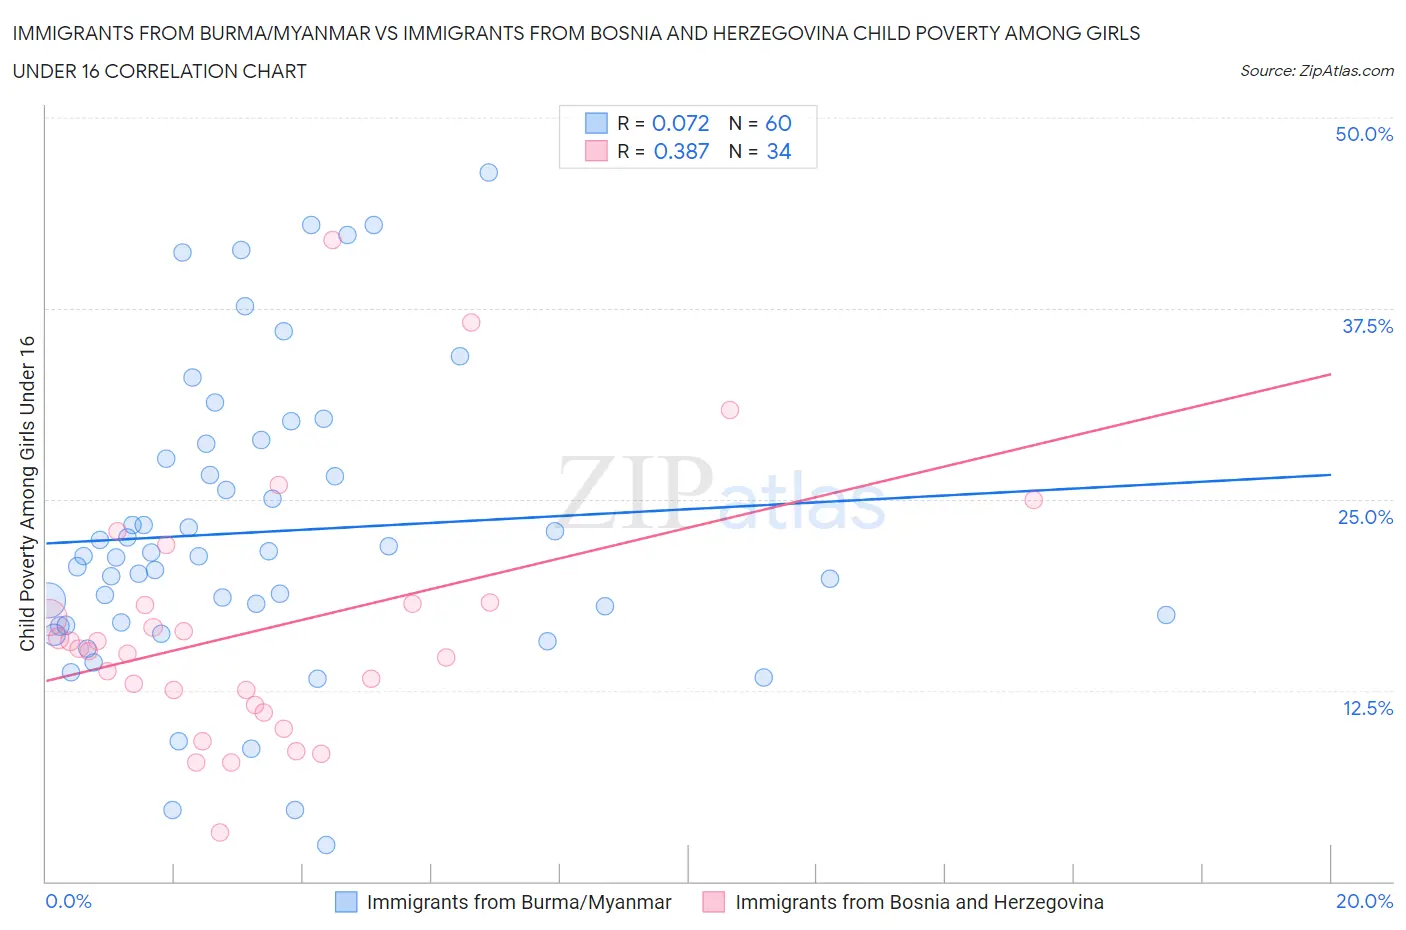 Immigrants from Burma/Myanmar vs Immigrants from Bosnia and Herzegovina Child Poverty Among Girls Under 16